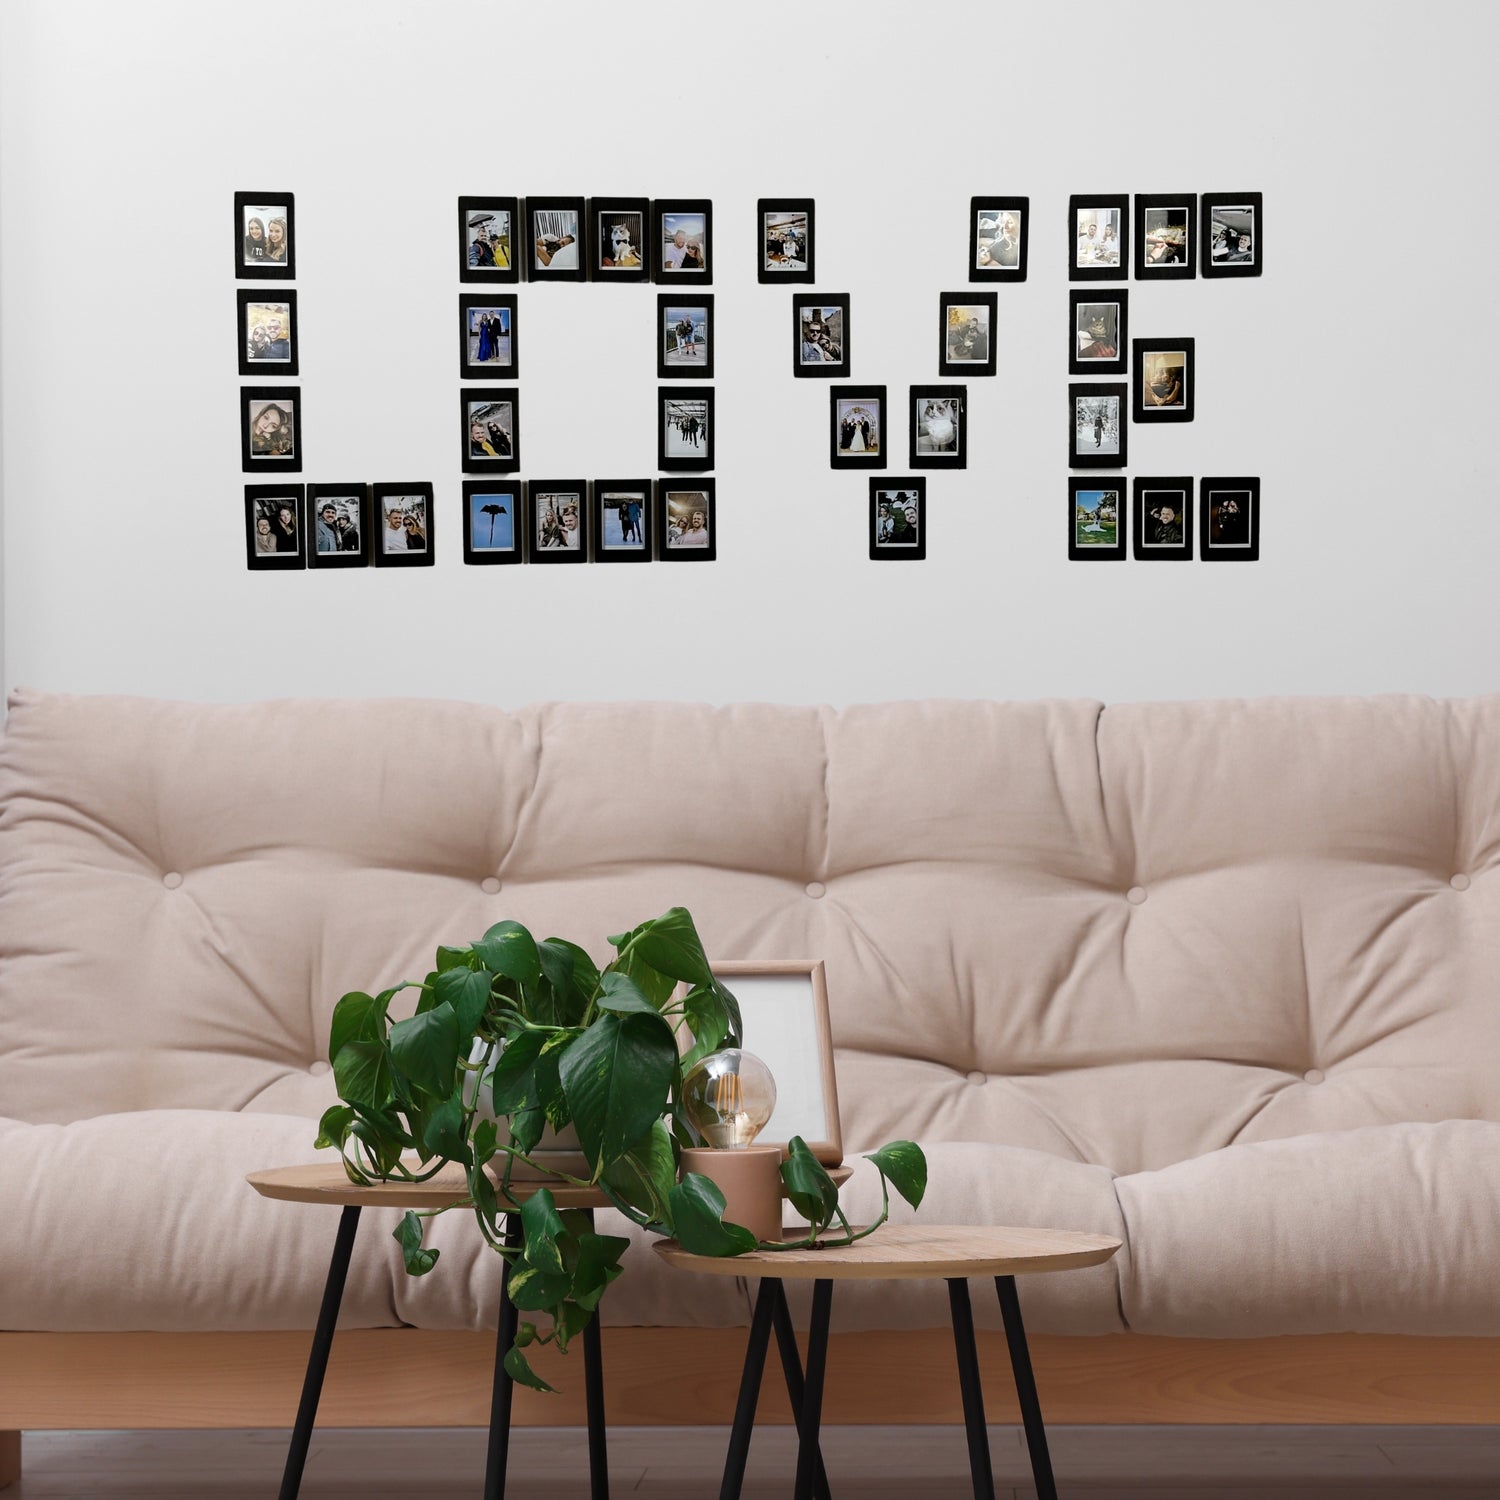 Jollylook Decoration Frames (Set of 10) - Stylish frames designed to bring a personal touch to any space